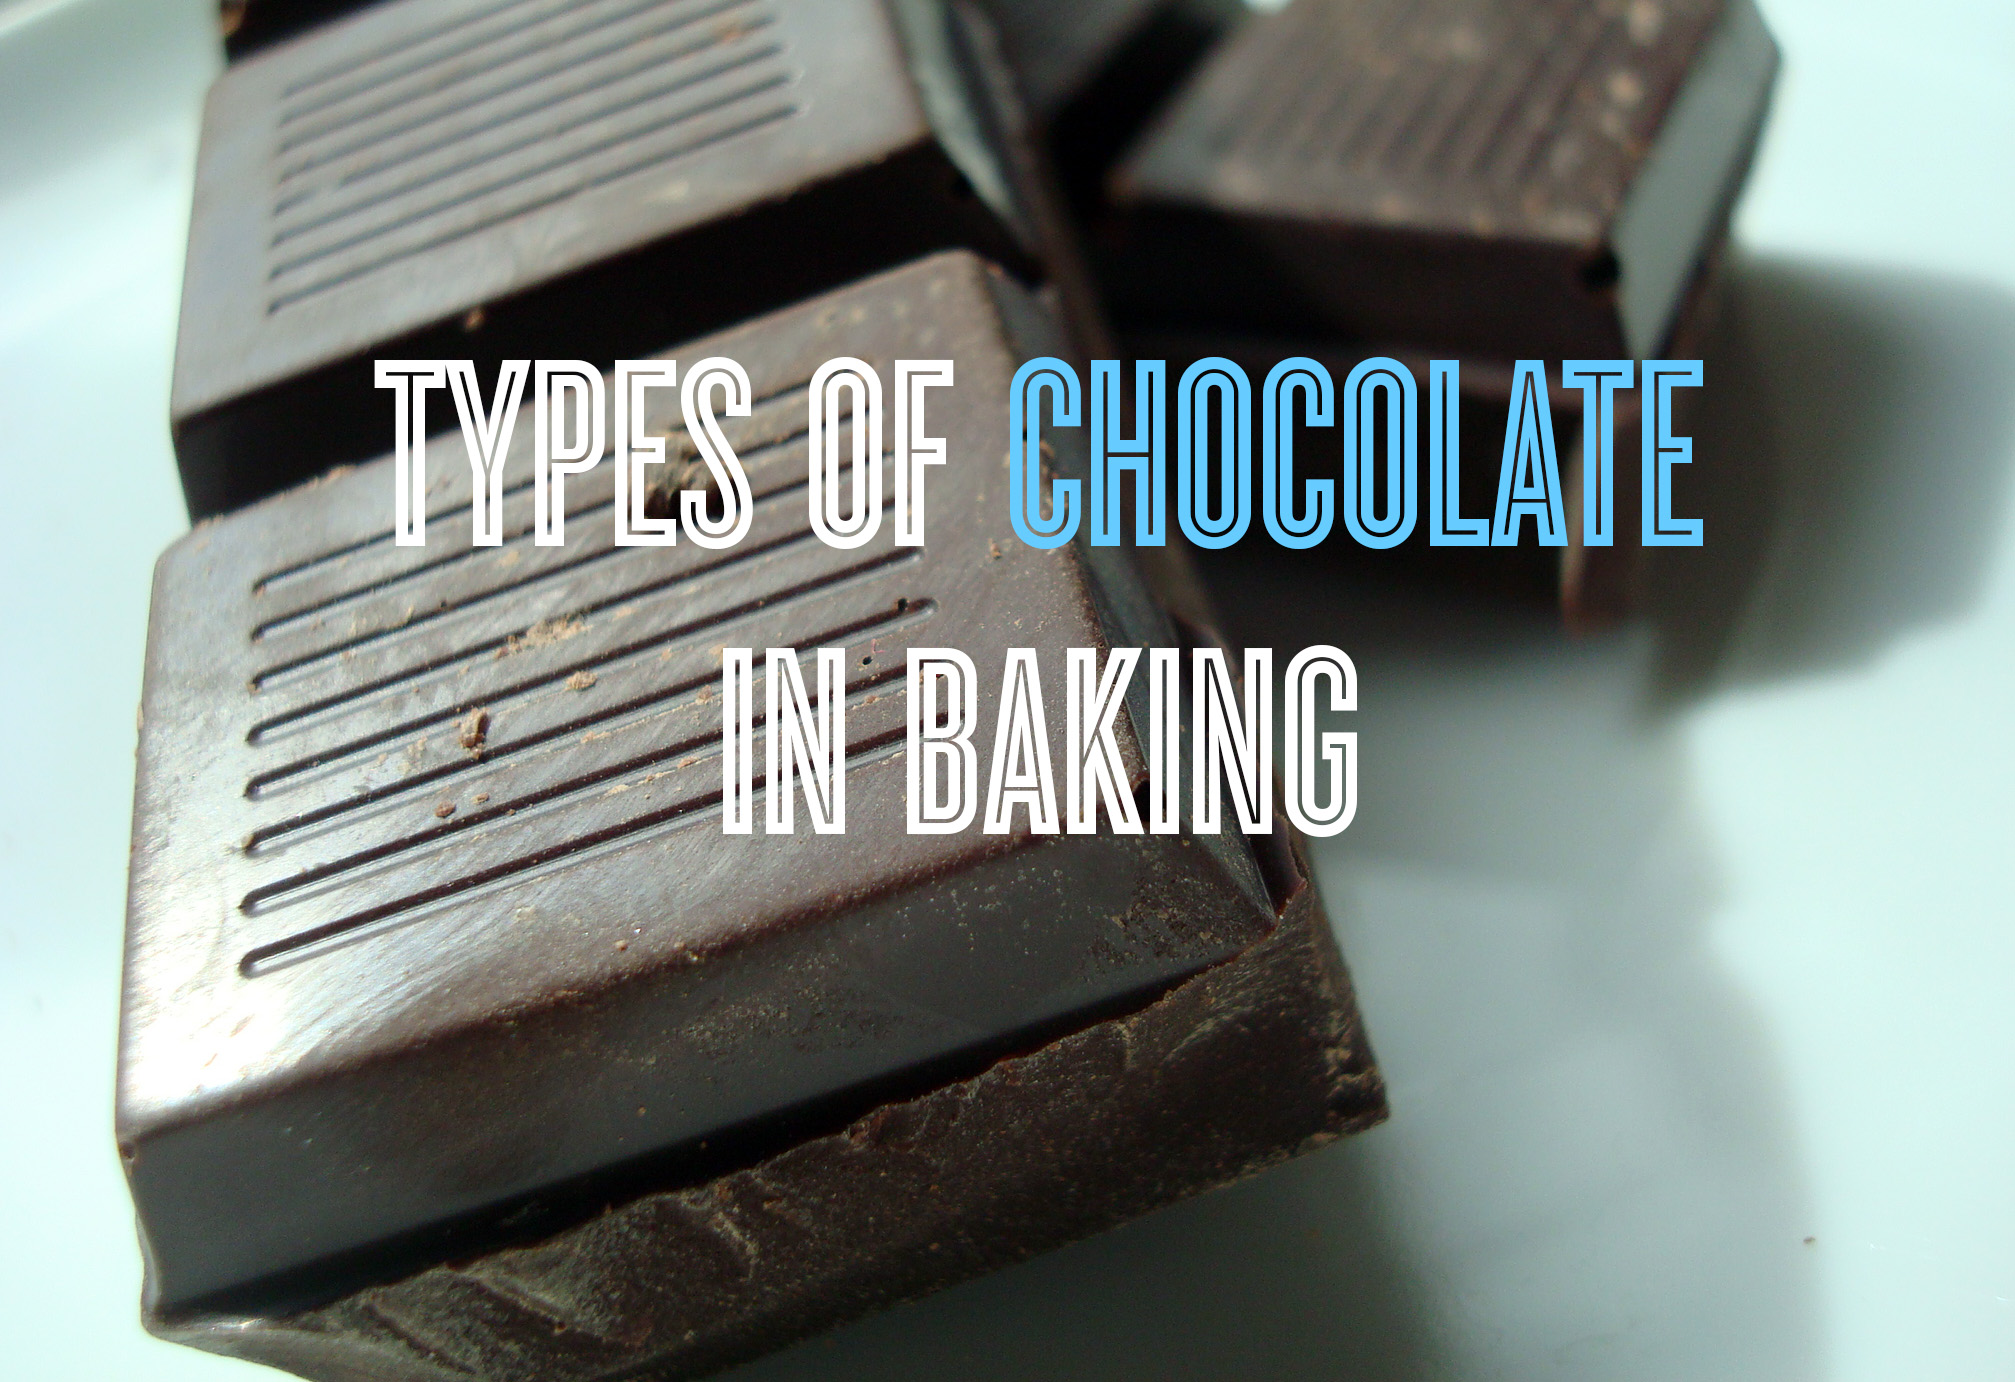 Types of chocolate in baking